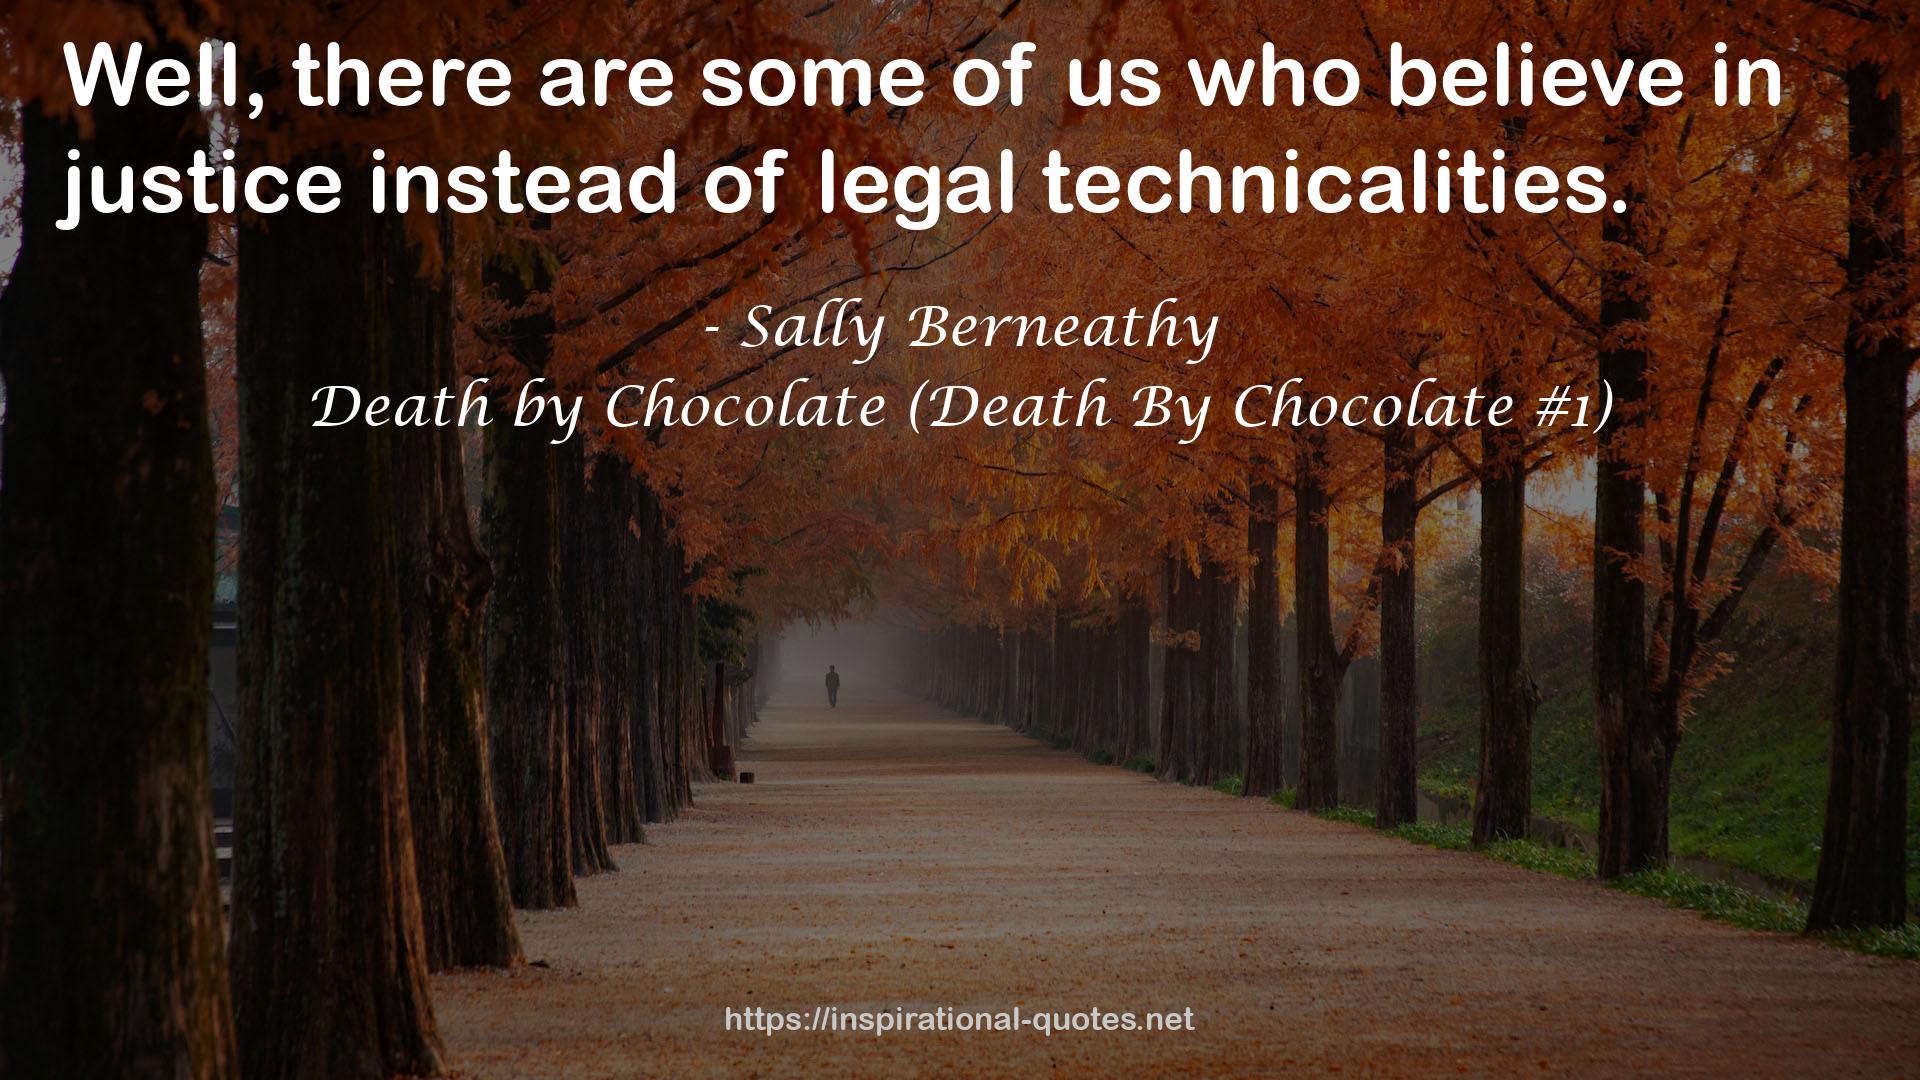 Death by Chocolate (Death By Chocolate #1) QUOTES